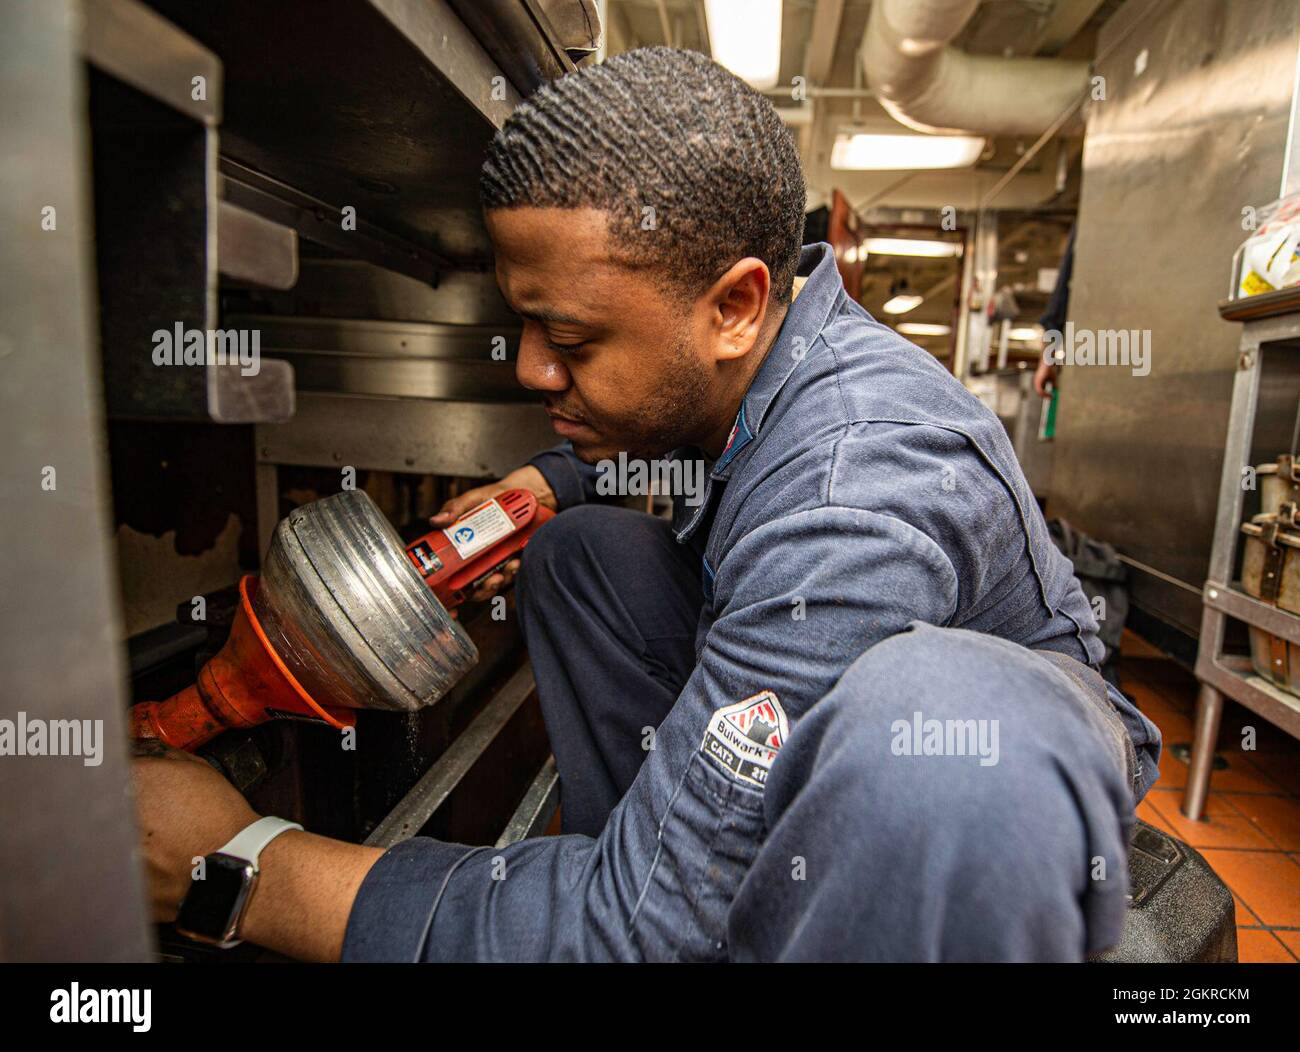 210619-N-IG124-1020 ATLANTIC OCEAN (June 19, 2021) Hull Maintenance Technician 3rd Class Trinity Carter, from Enfield, North Carolina, uses a hand snake to remove a clog from a grease trap in a scullery aboard the Nimitz-class aircraft carrier USS Harry S. Truman (CVN 75) during Tailored Ship’s Training Availability (TSTA) and Final Evaluation Problem (FEP). Harry S. Truman, with embarked Carrier Air Wing 1, is underway conducting TSTA and FEP to assess their ability to conduct combat missions, support functions and survive complex casualty control situations in preparation for full integratio Stock Photo